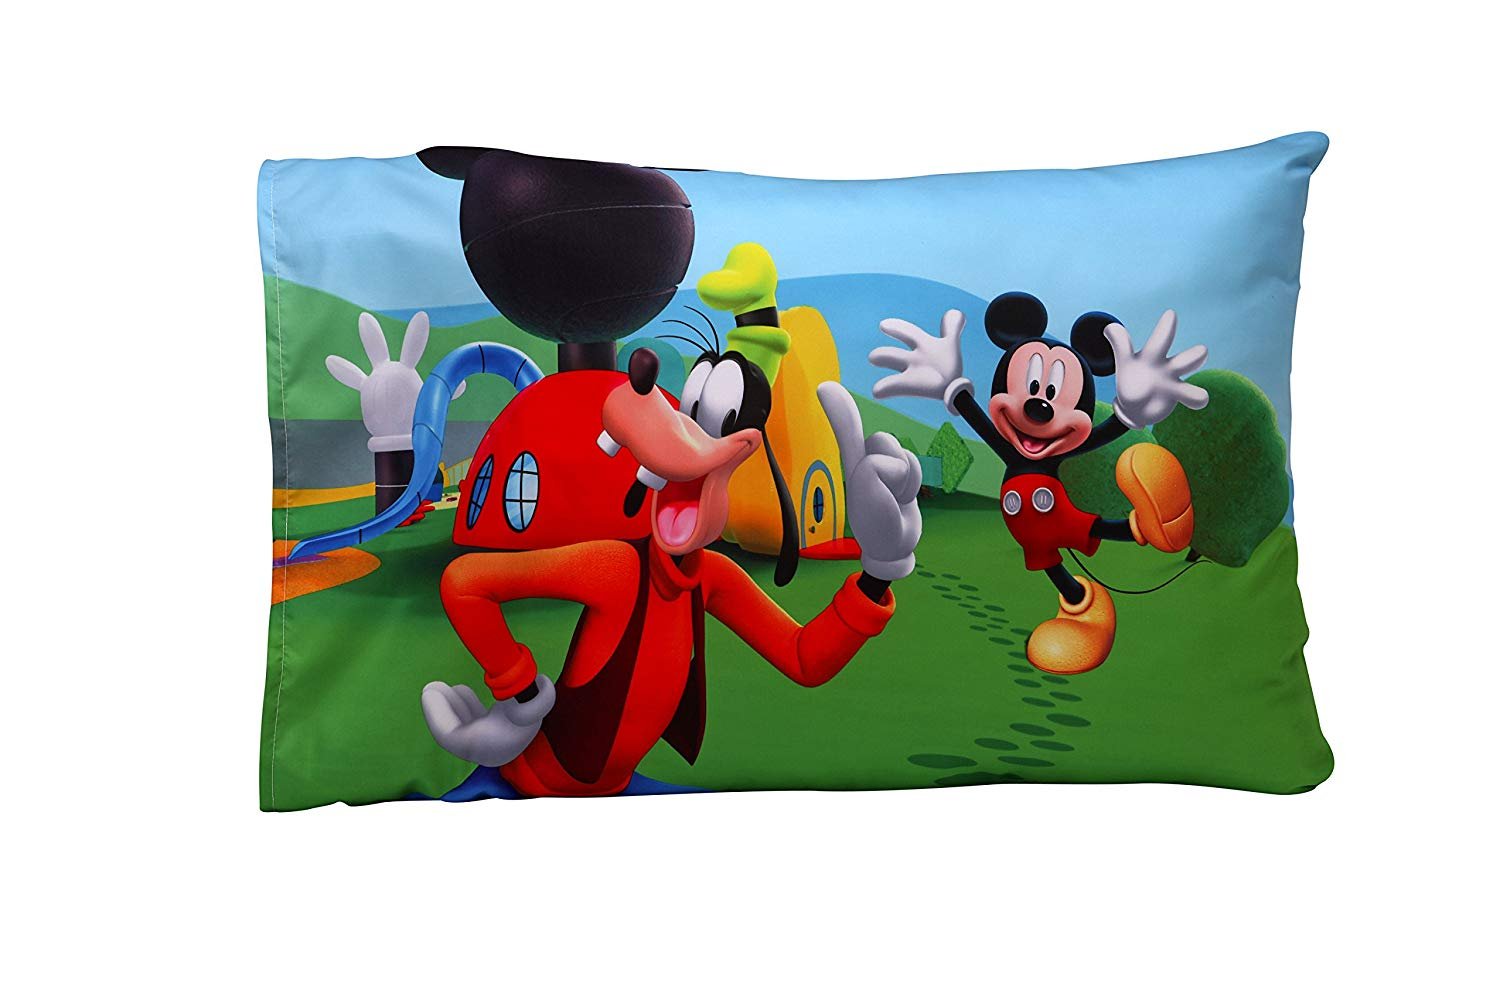 Disney Mickey Mouse Clubhouse Toddler Sheet Set - image 5 of 5